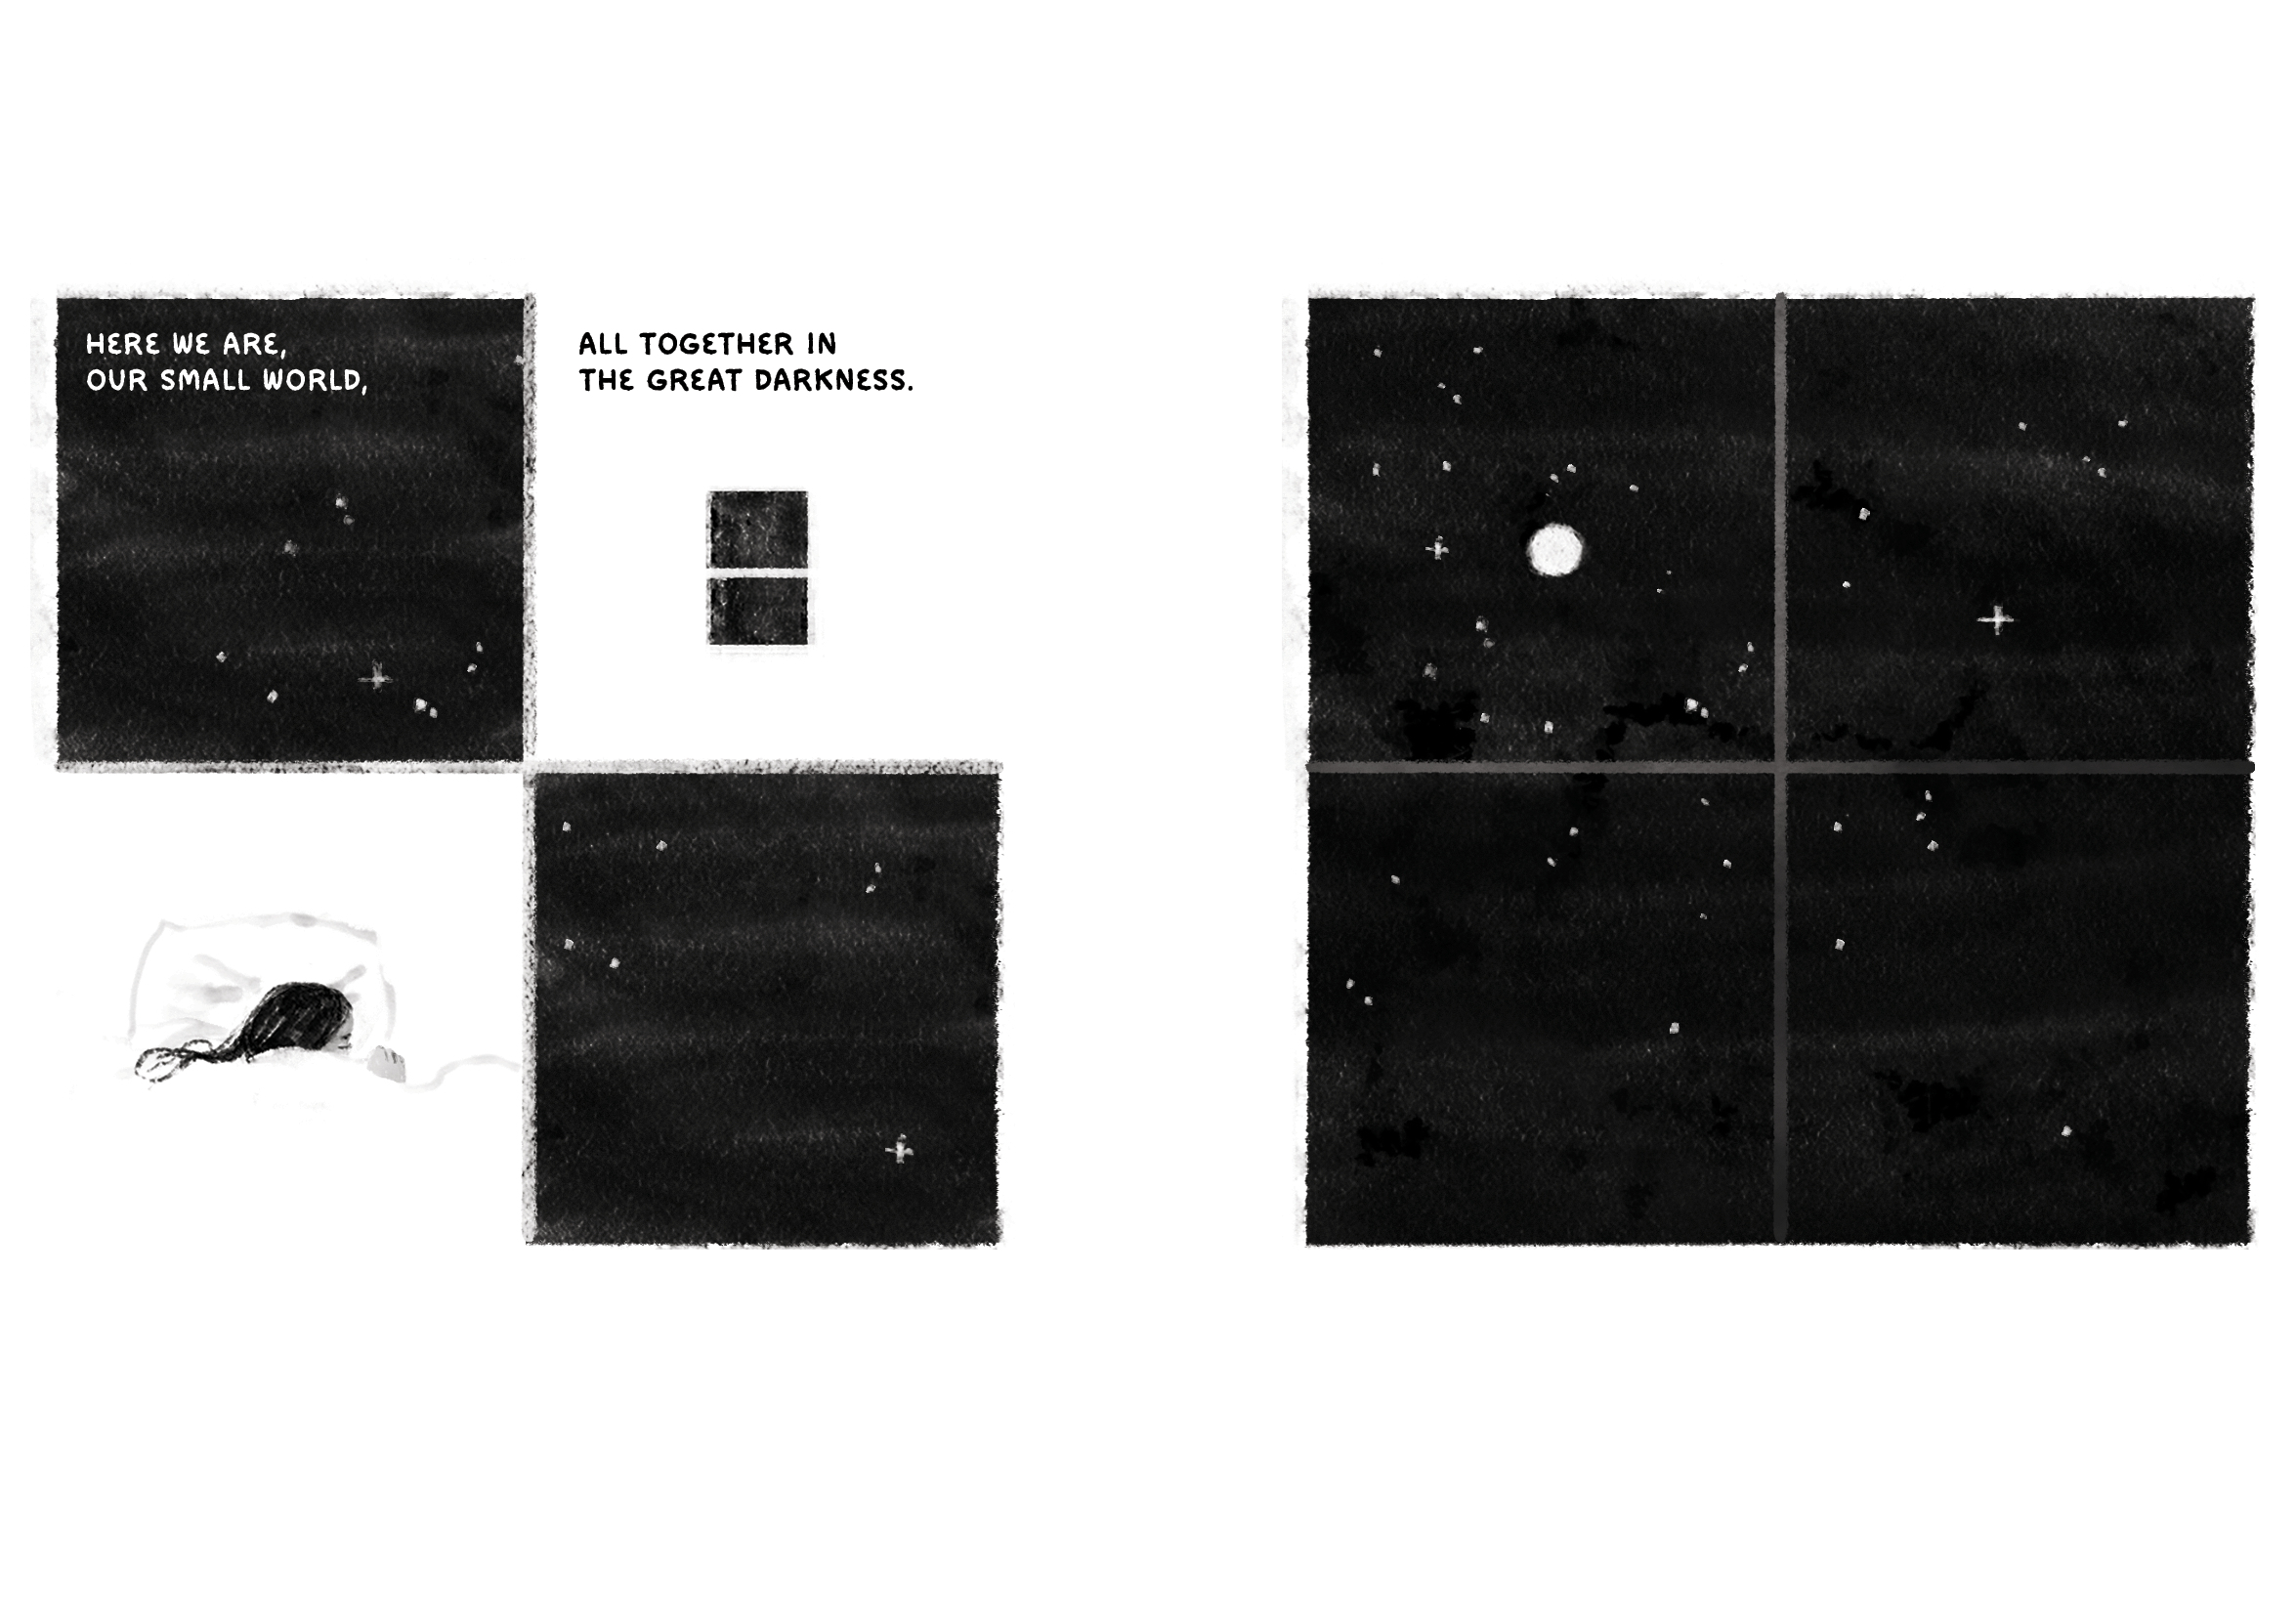 Two four-panel comics. First comic text: Here we are, our small world, all together in the great darkness. First comic images: A handful of stars; a view through a dark window; someone sleeping in a bed. Tucked into a blanket, their long dark hair extends across the pillow. Second comic has no text. Second comic image: A moon in a broad starry sky